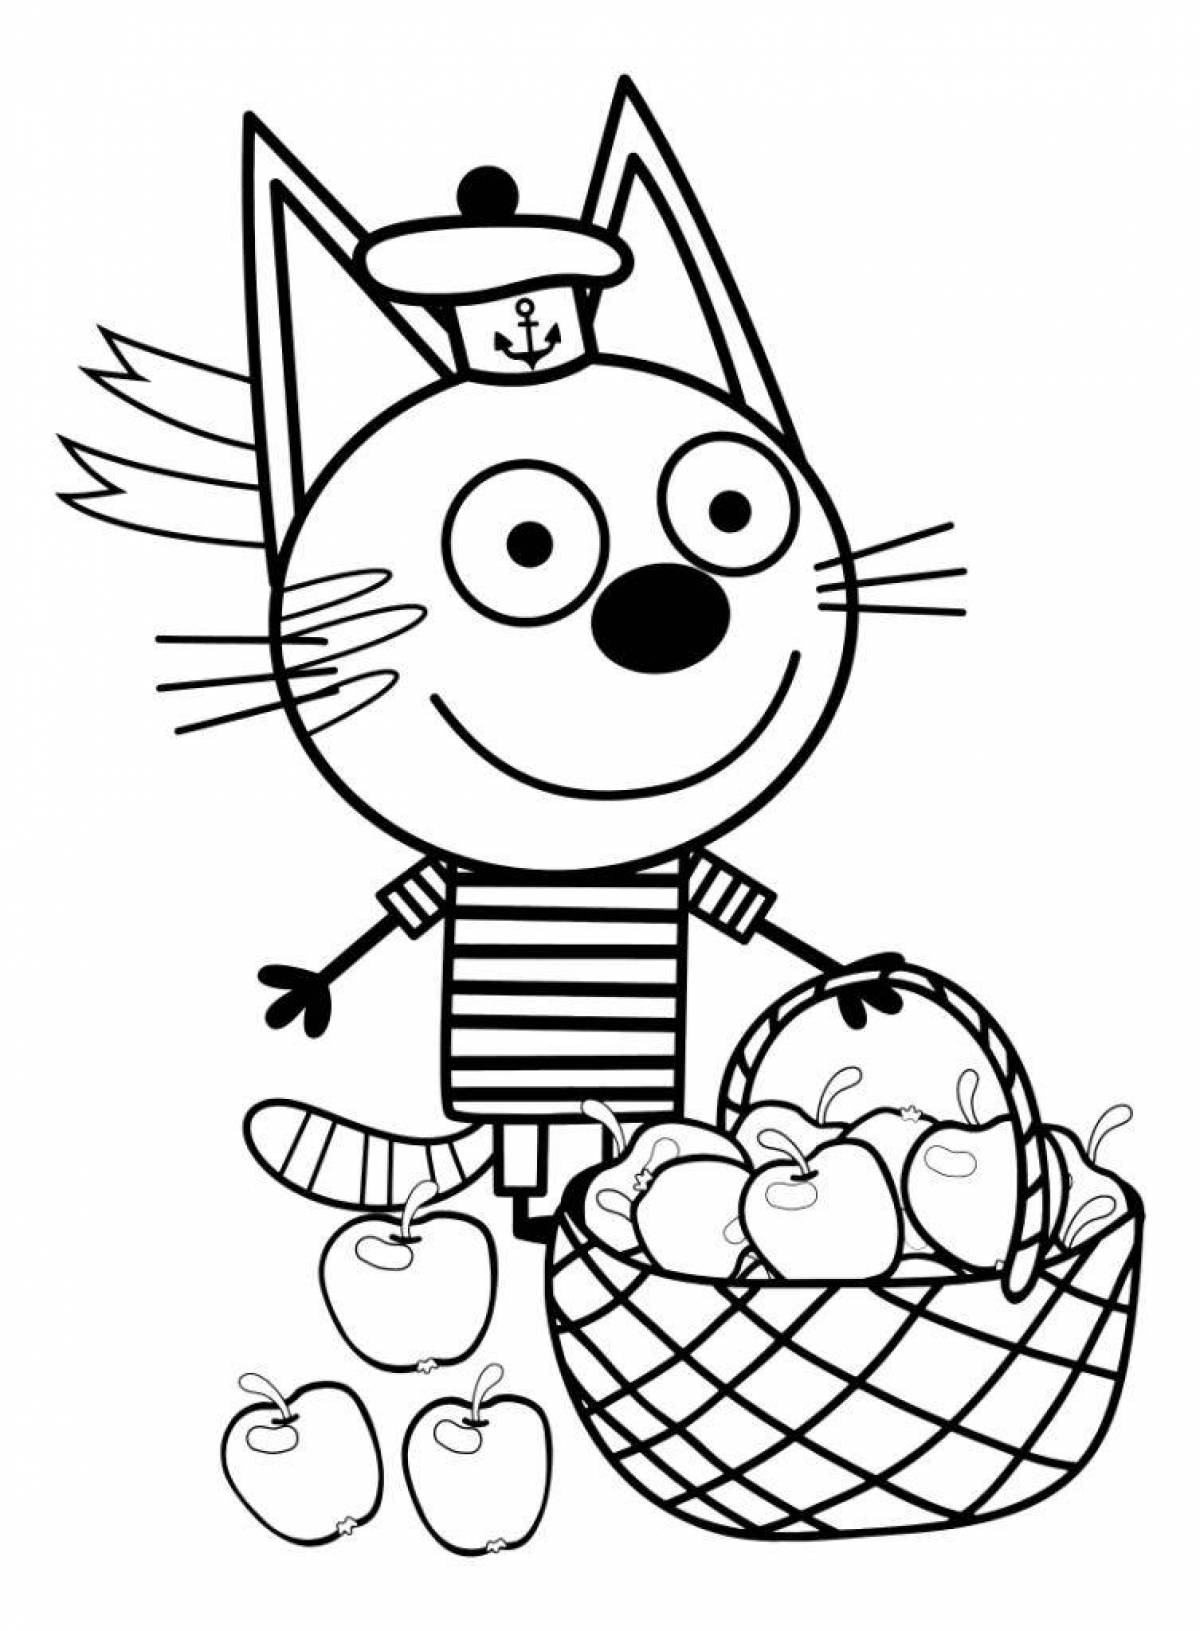 Charm 3 cats coloring page for students